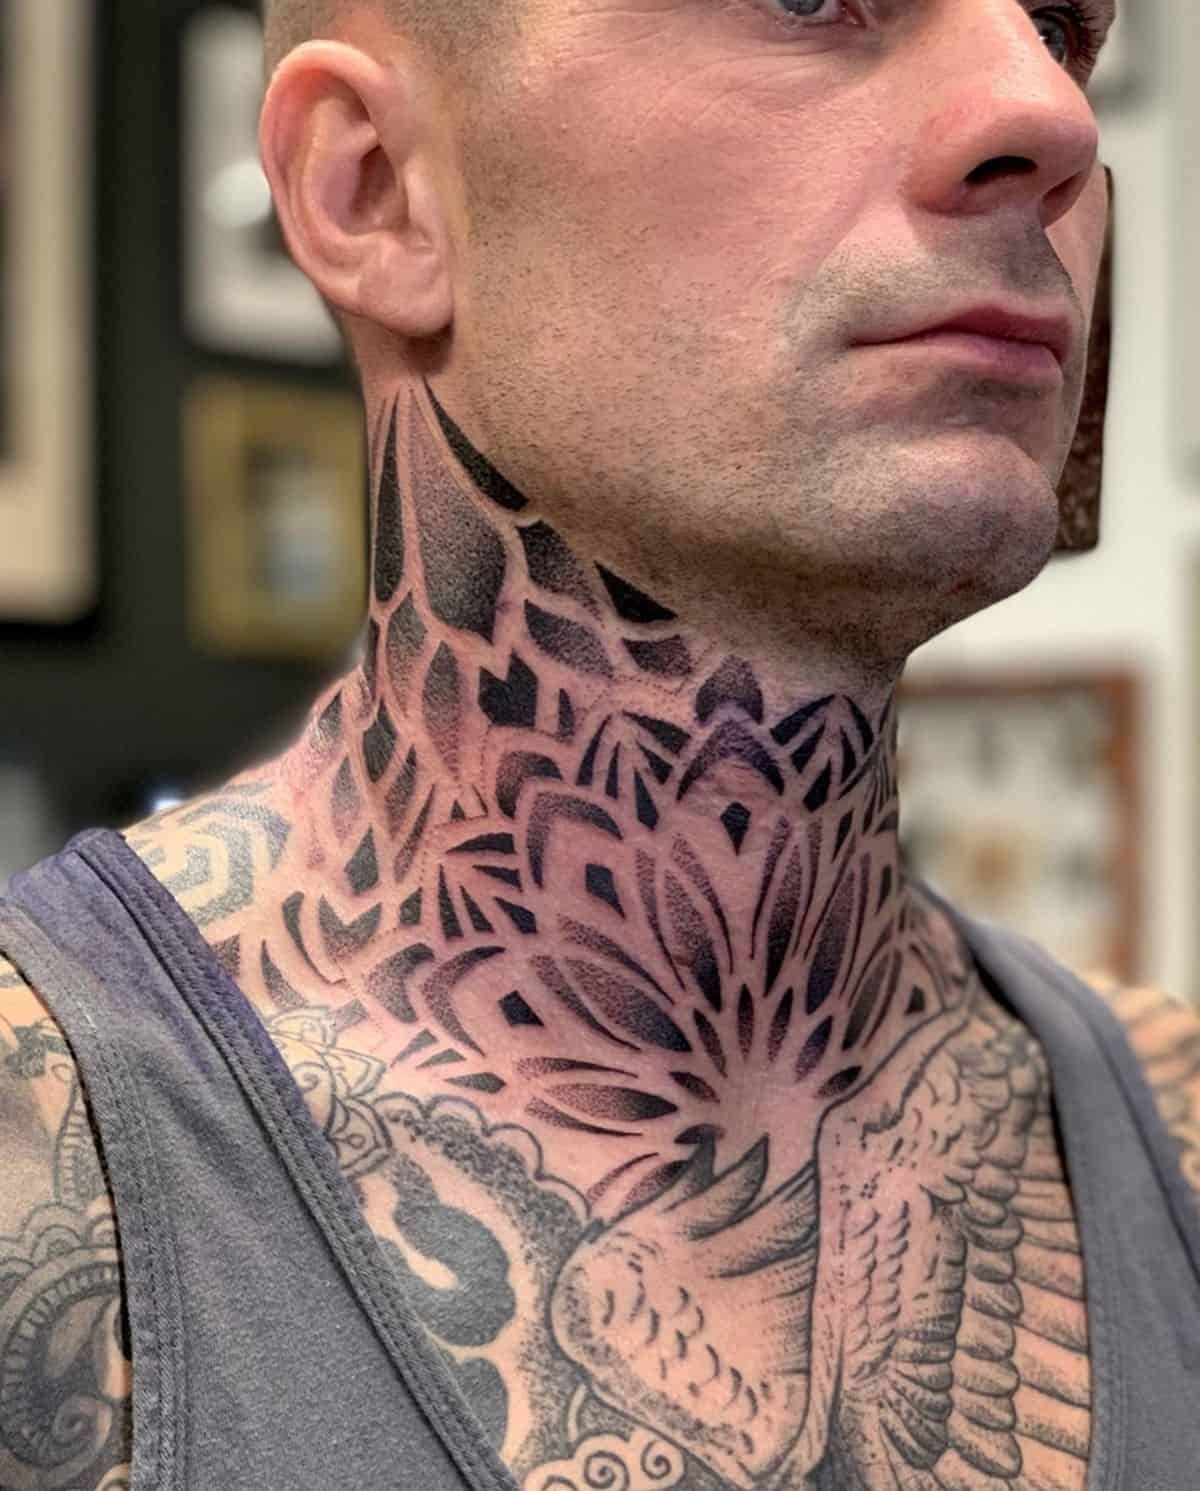 Top 15 Neck Tattoos for Men: Stylish Neck Tattoo Ideas for the Modern Man